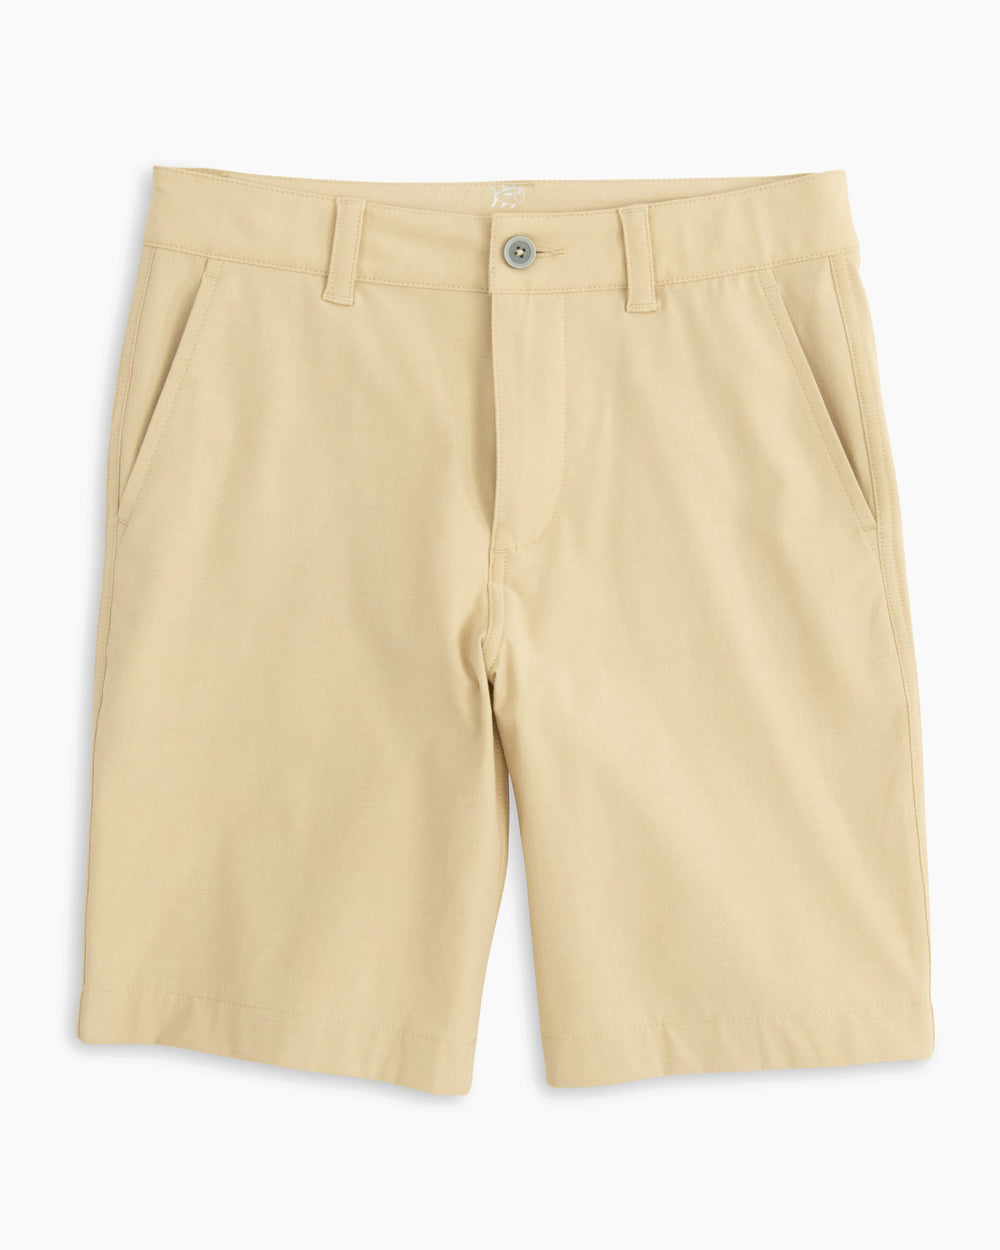 The front view of the Kid's Khaki T3 Gulf Short by Southern Tide - Coastal Khaki